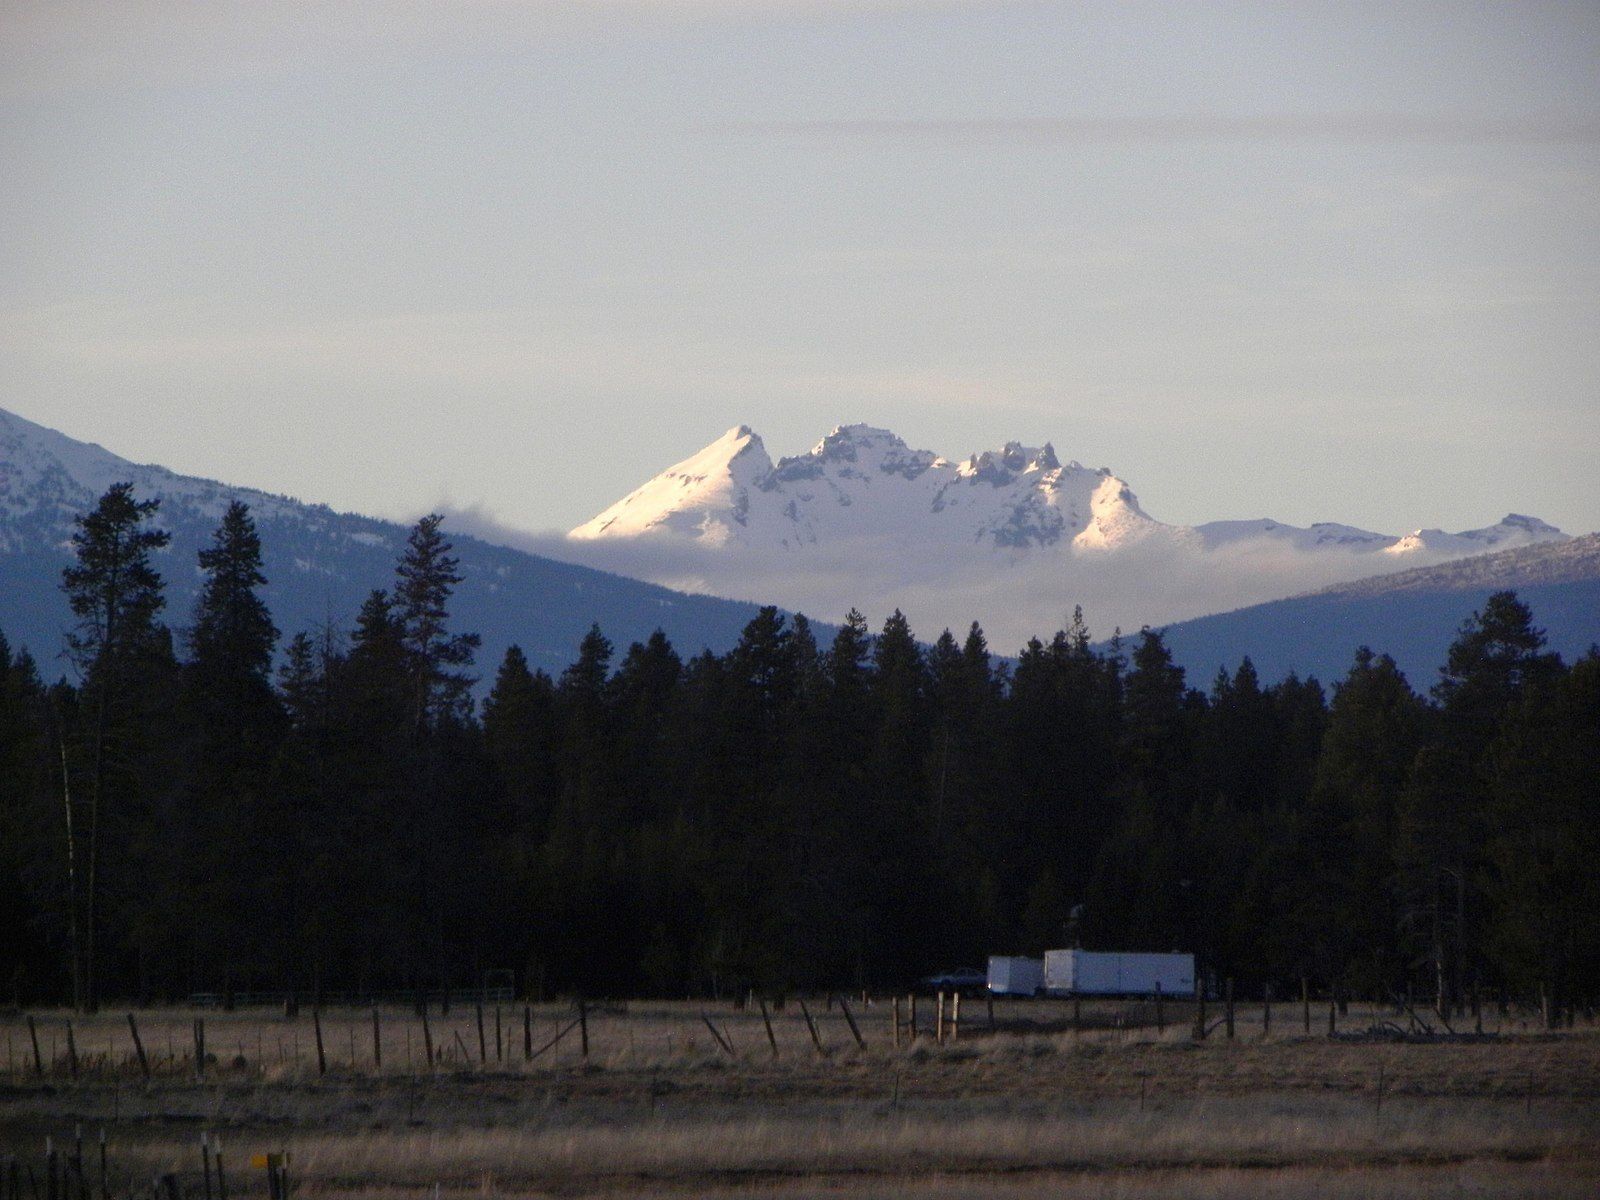 Deschutes National Forest, Oregon USA - View of the Three Sisters